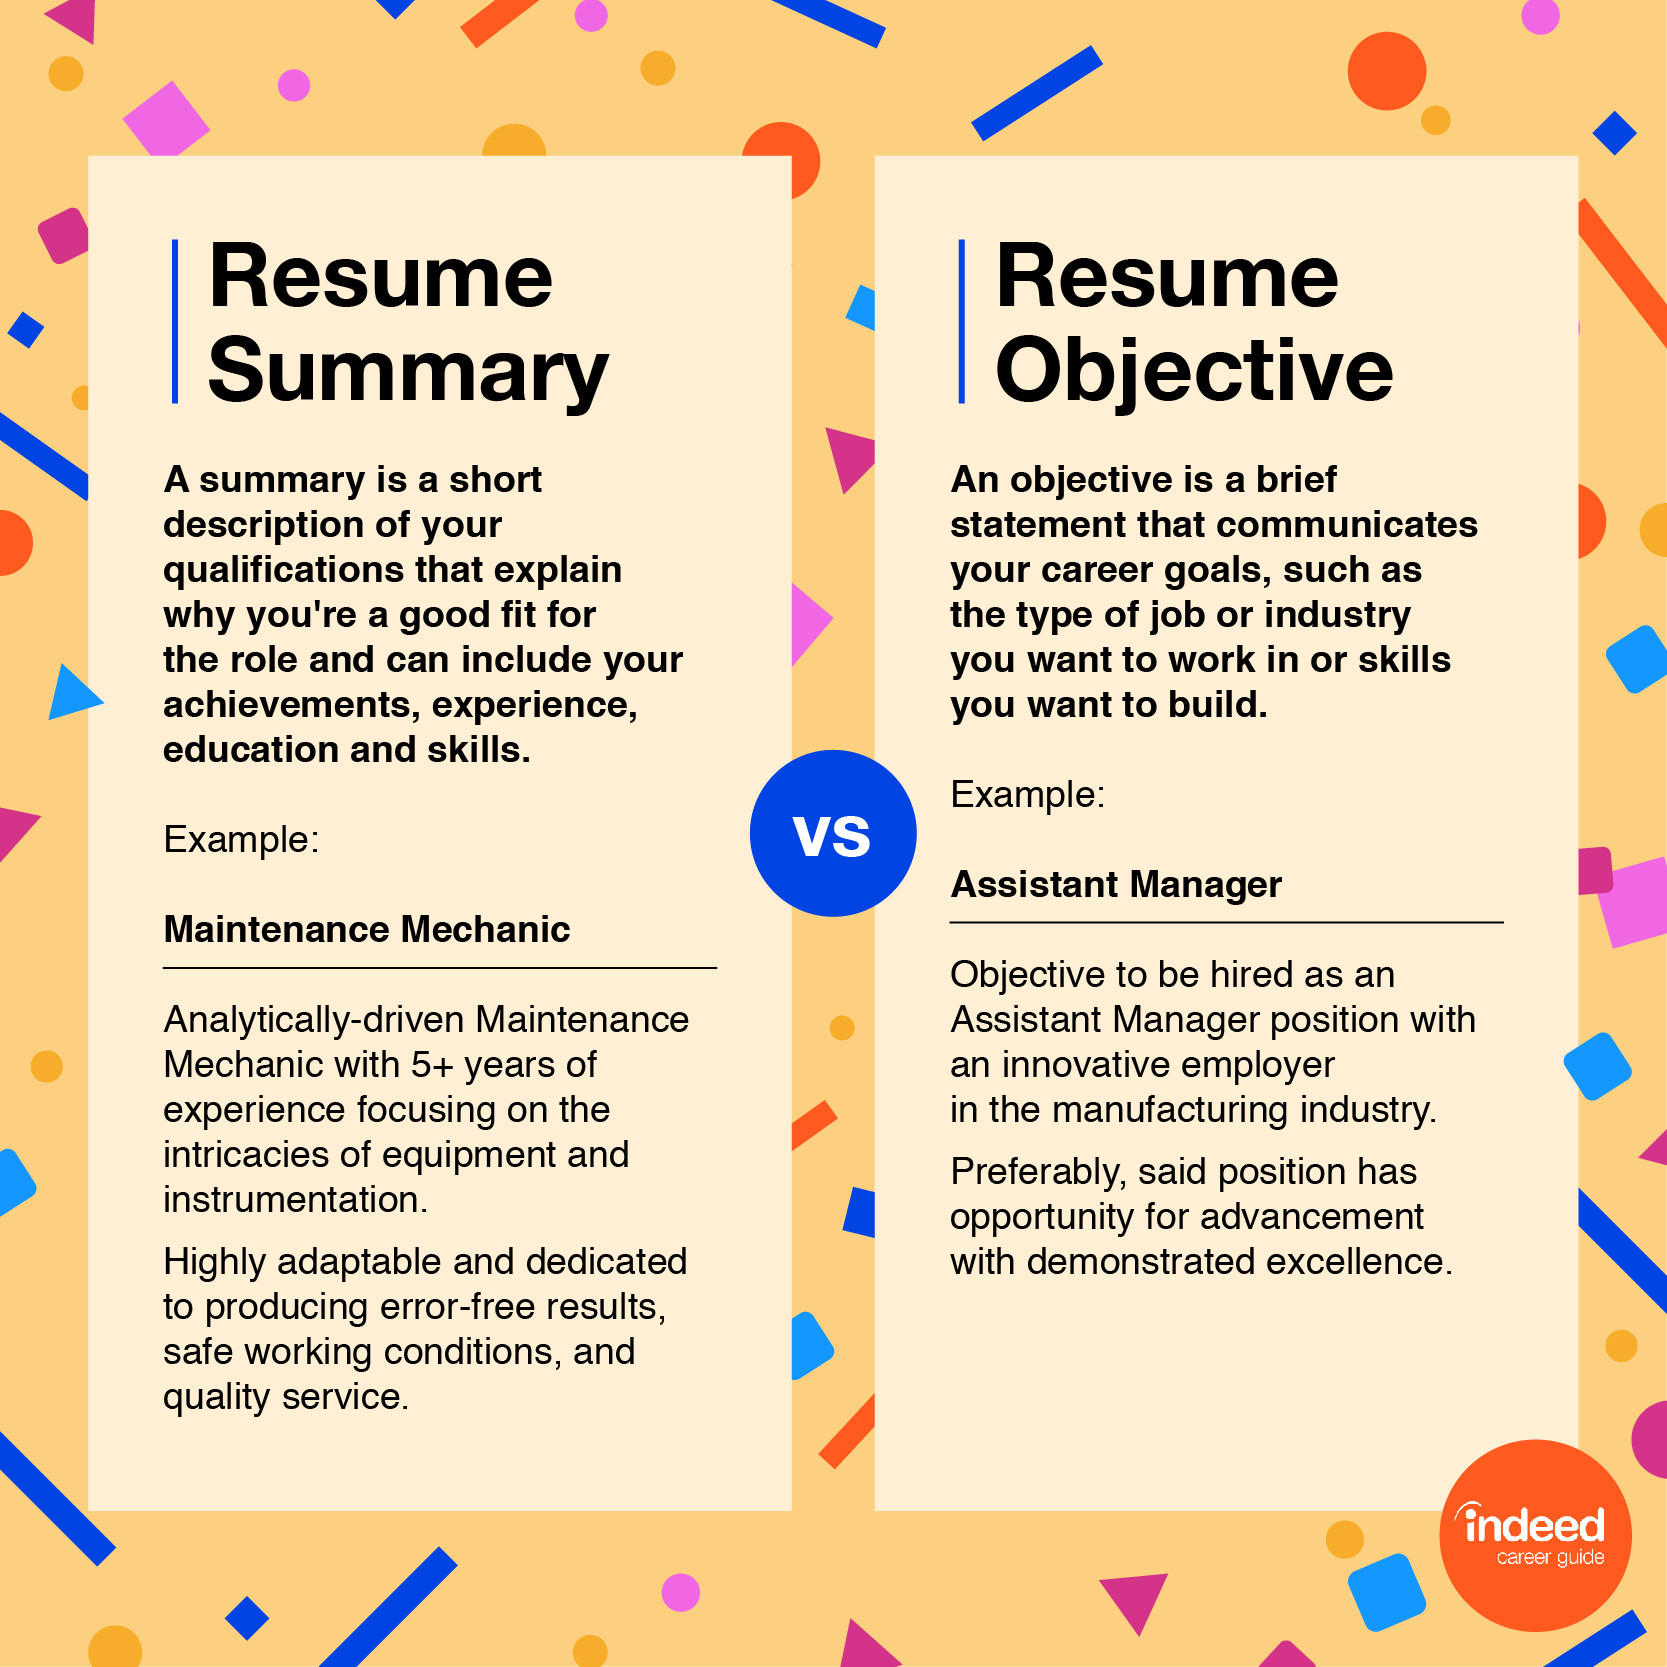 Sample Resume Objective Statements for Management 70lancarrezekiq Resume Objective Examples (with Tips and How-to Guide …